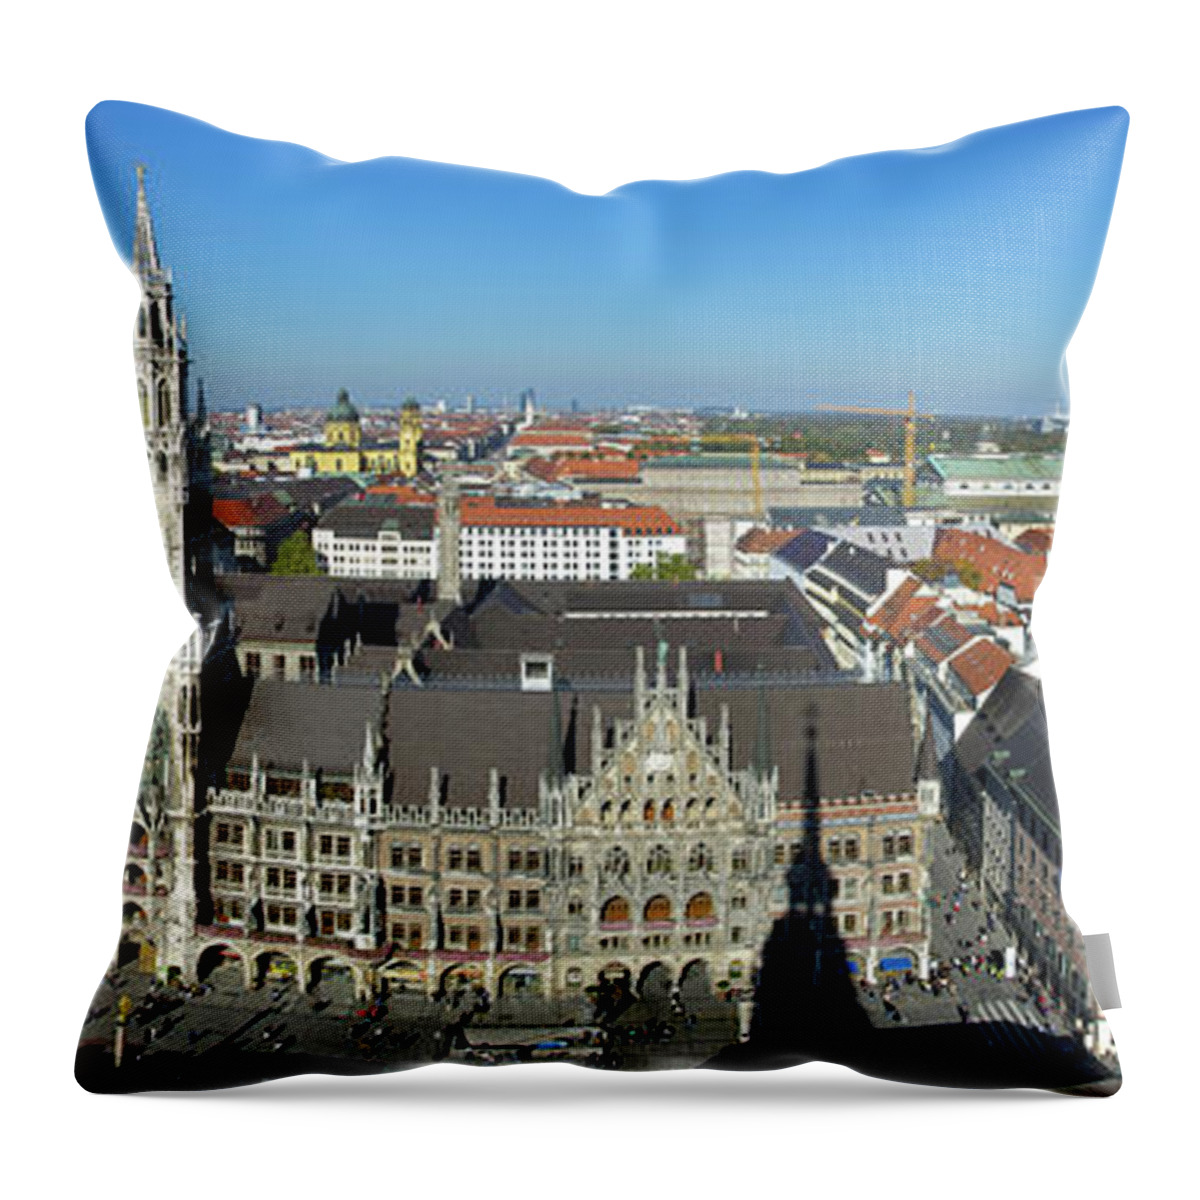 Munich Throw Pillow featuring the photograph Munich Old Town Panorama by Sean Hannon